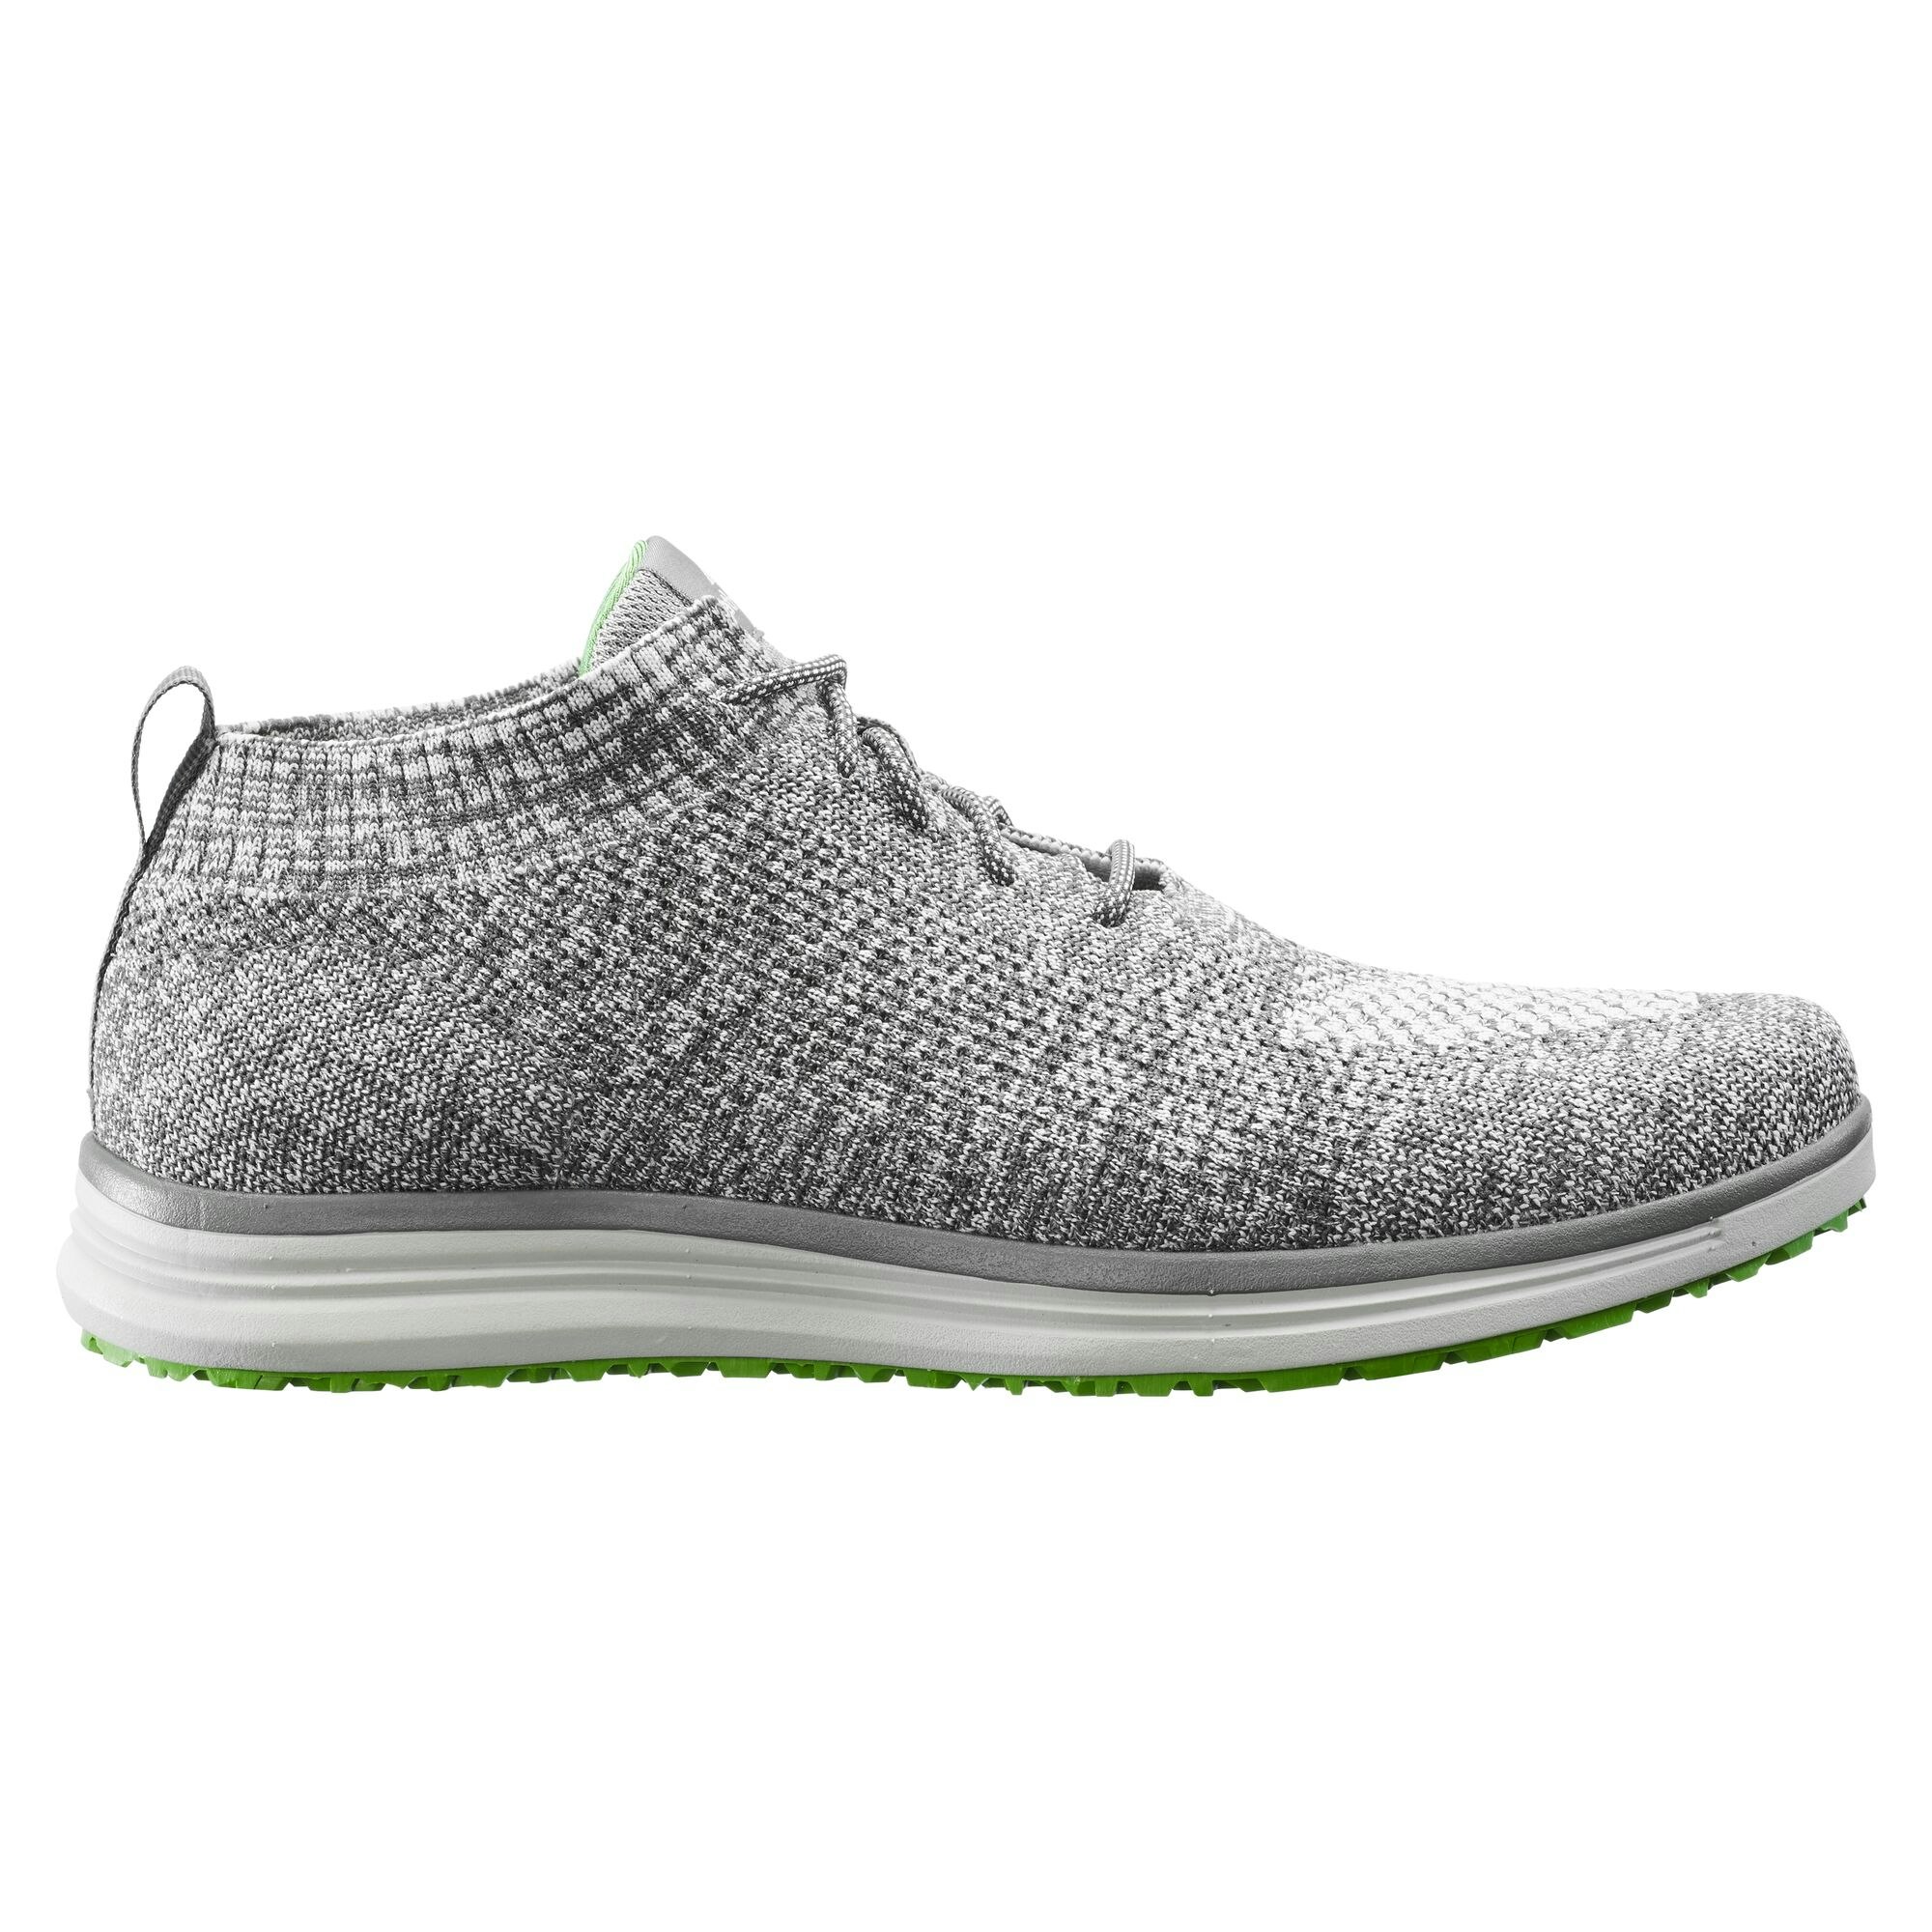 Federate Men's Knit Shoes